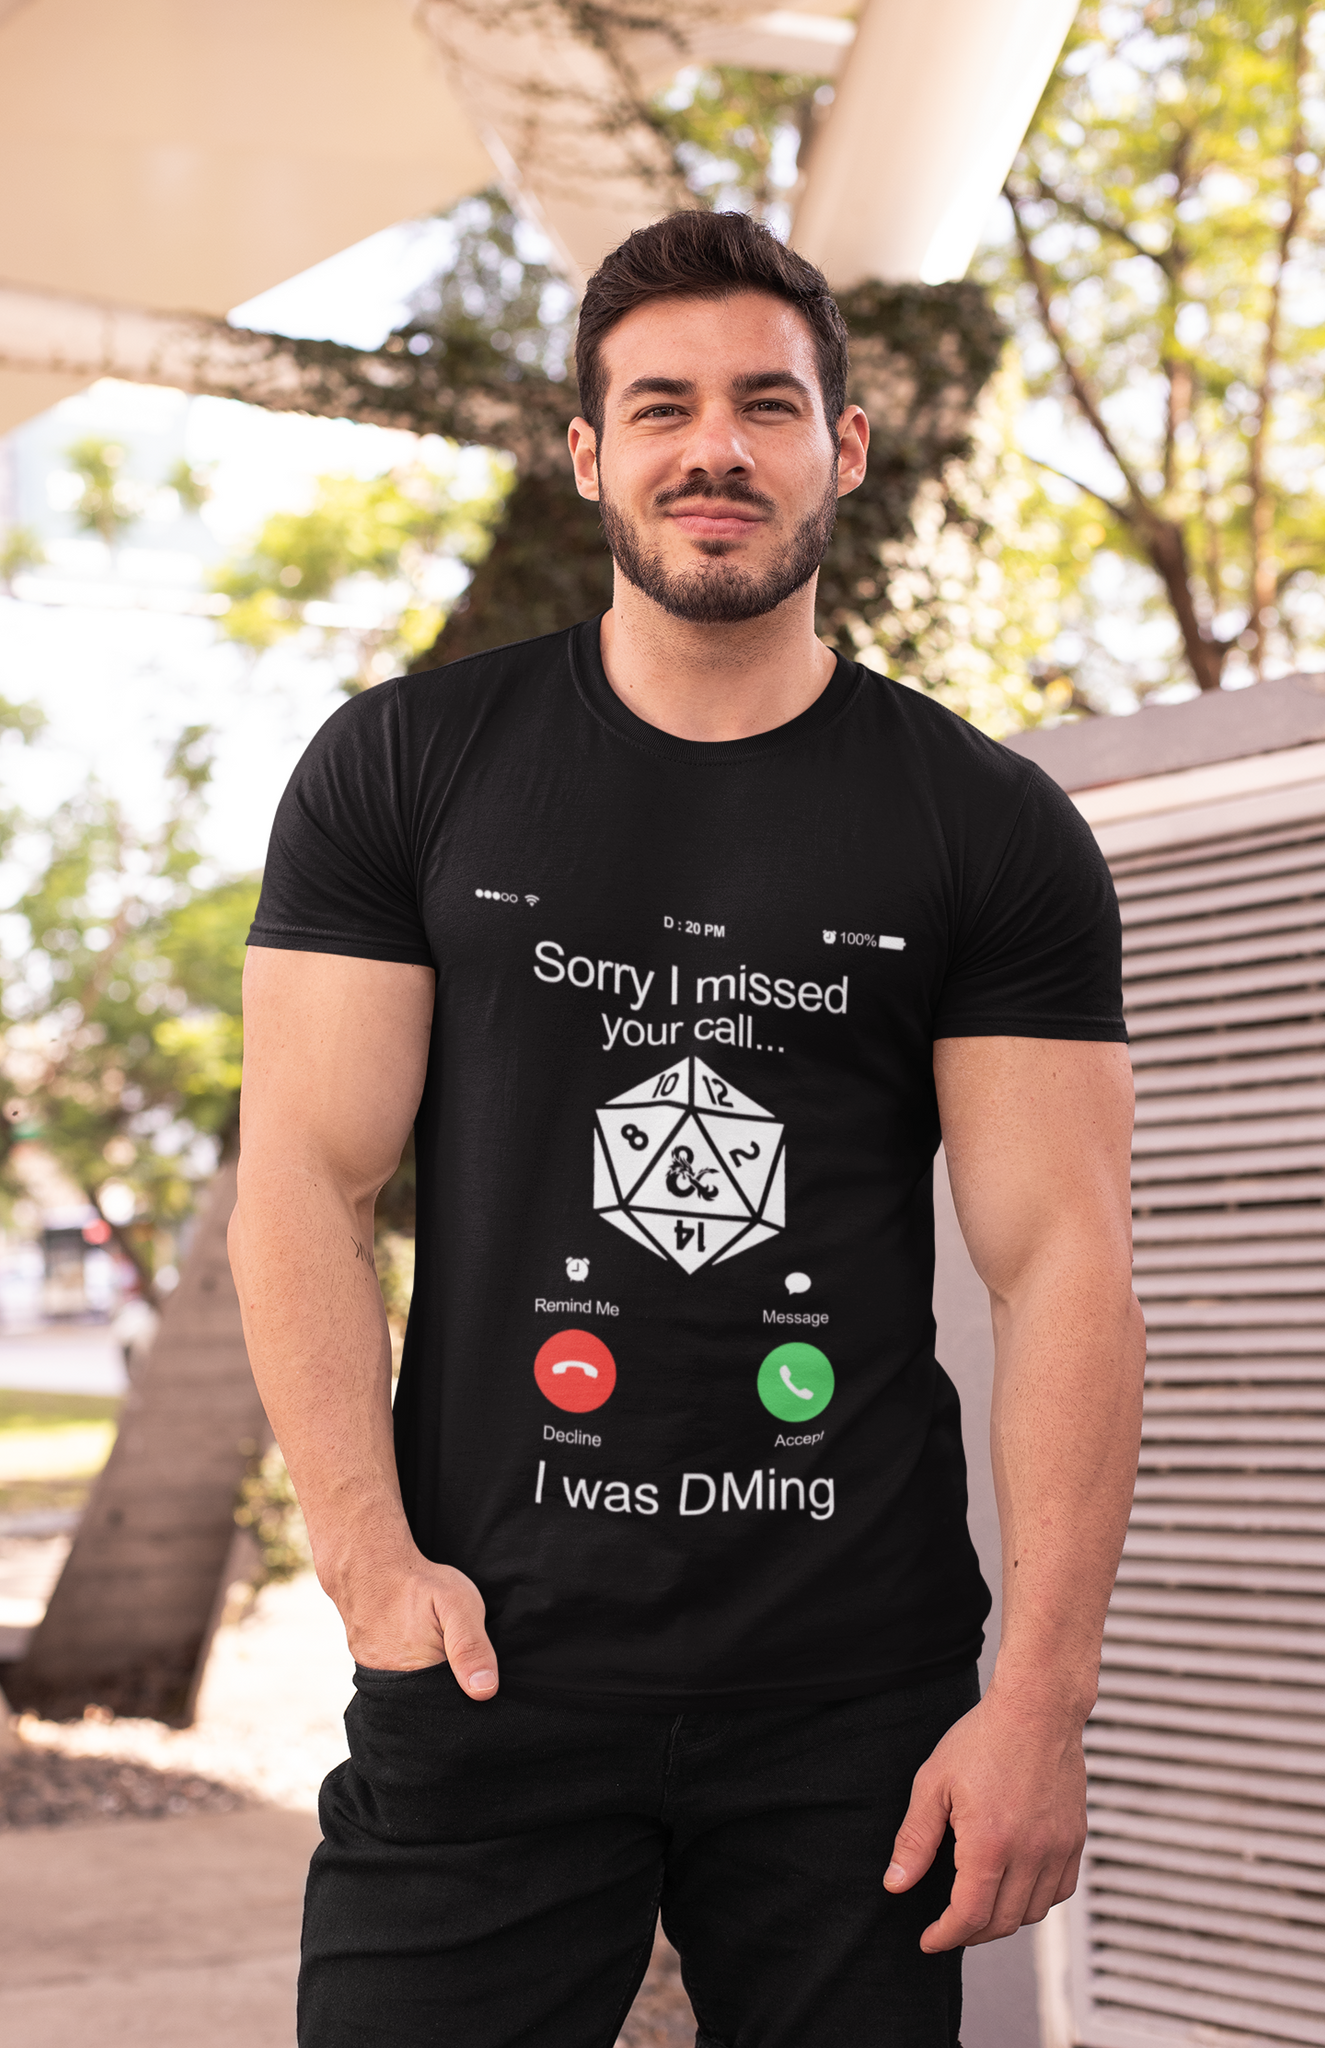 Dungeon And Dragon T Shirt, RPG Dice Games Tshirt, Sorry I Missed Your Call I Was DMing DND T Shirt